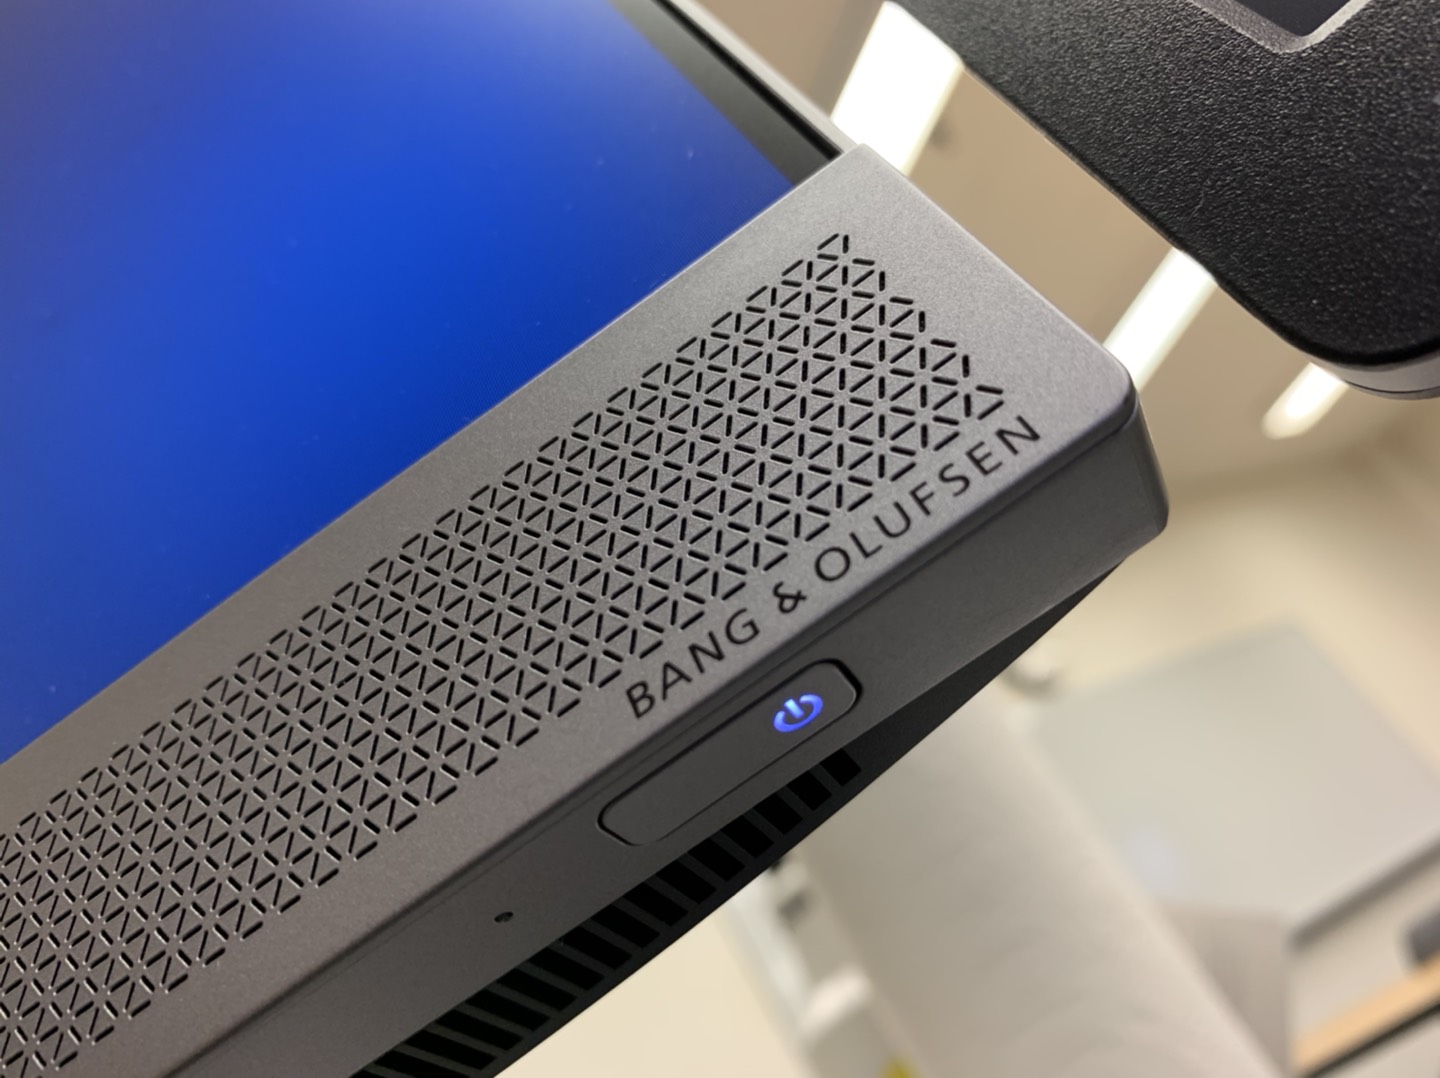 A view of the power button located on the bottom of the all-in-one Flex classroom computers.